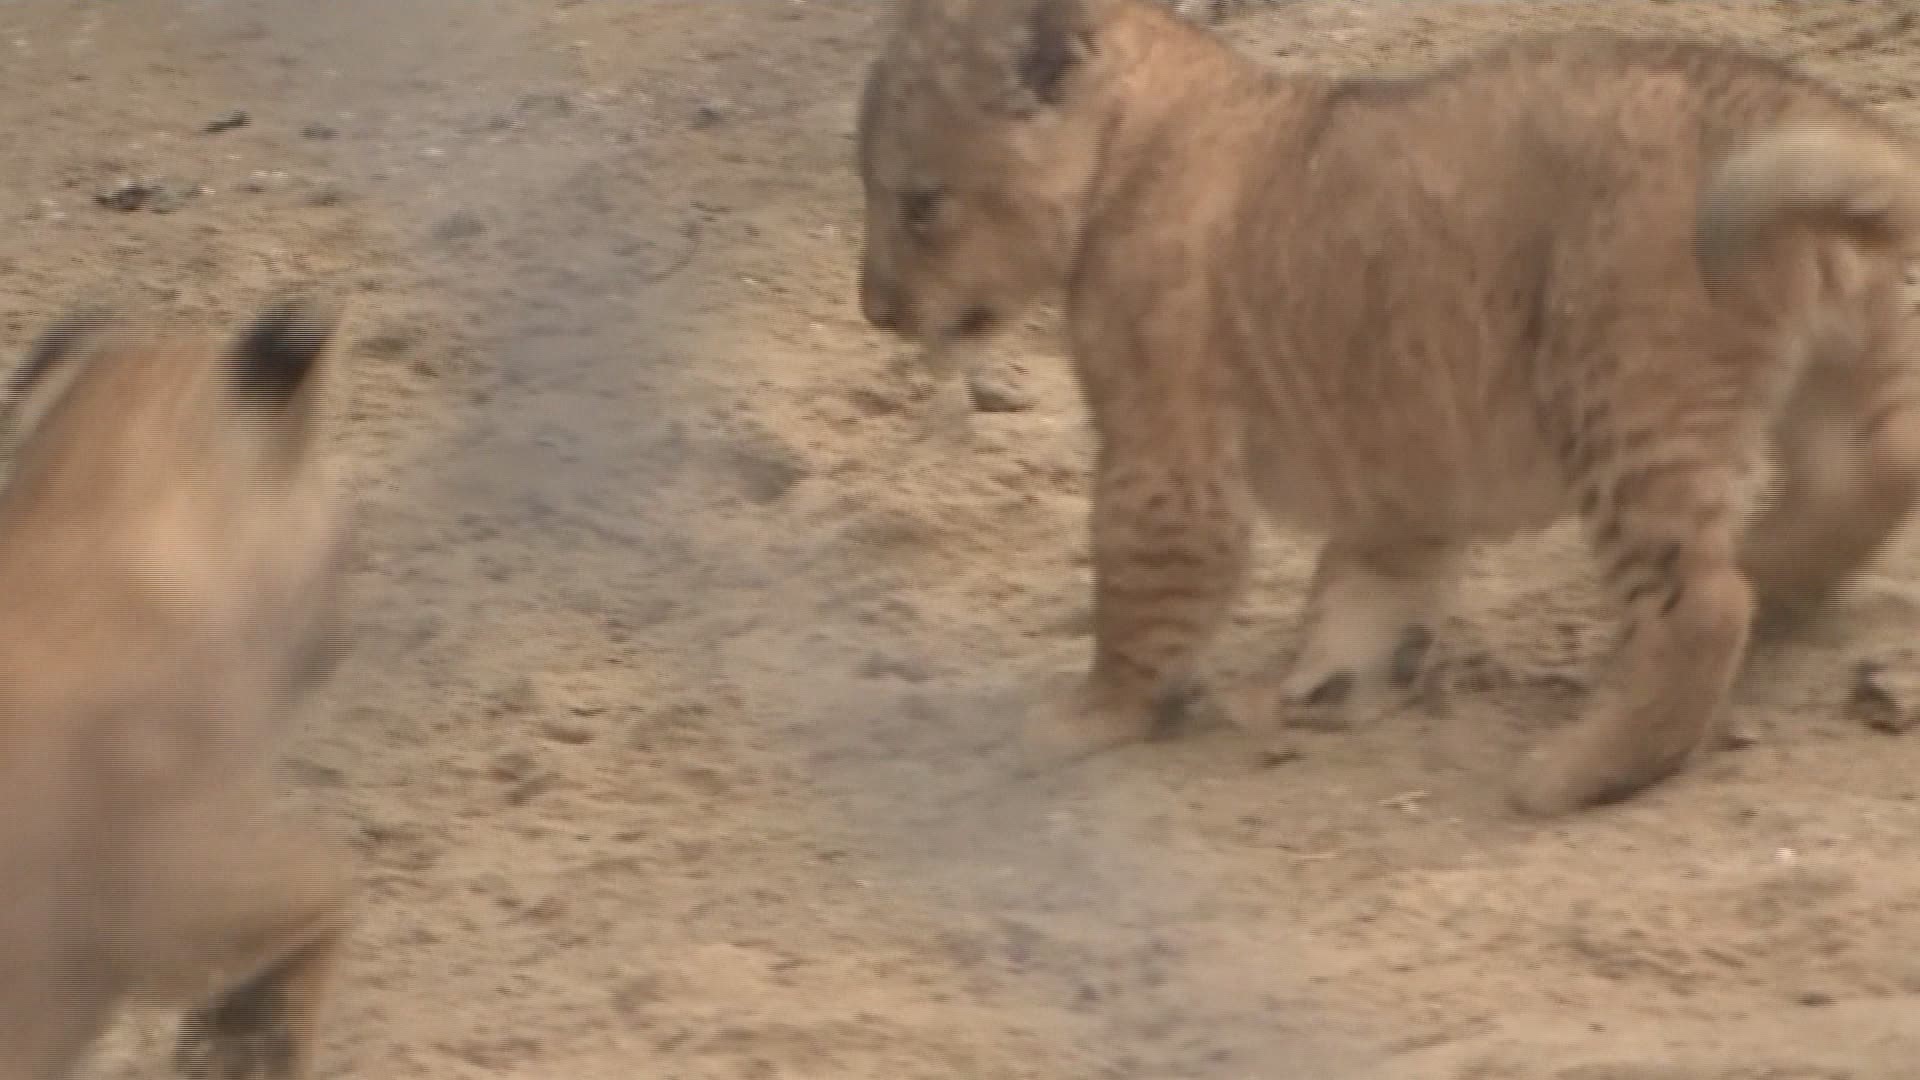 Three Barbary lion cubs have been born in a Czech zoo - a vital contribution to a small surviving population.